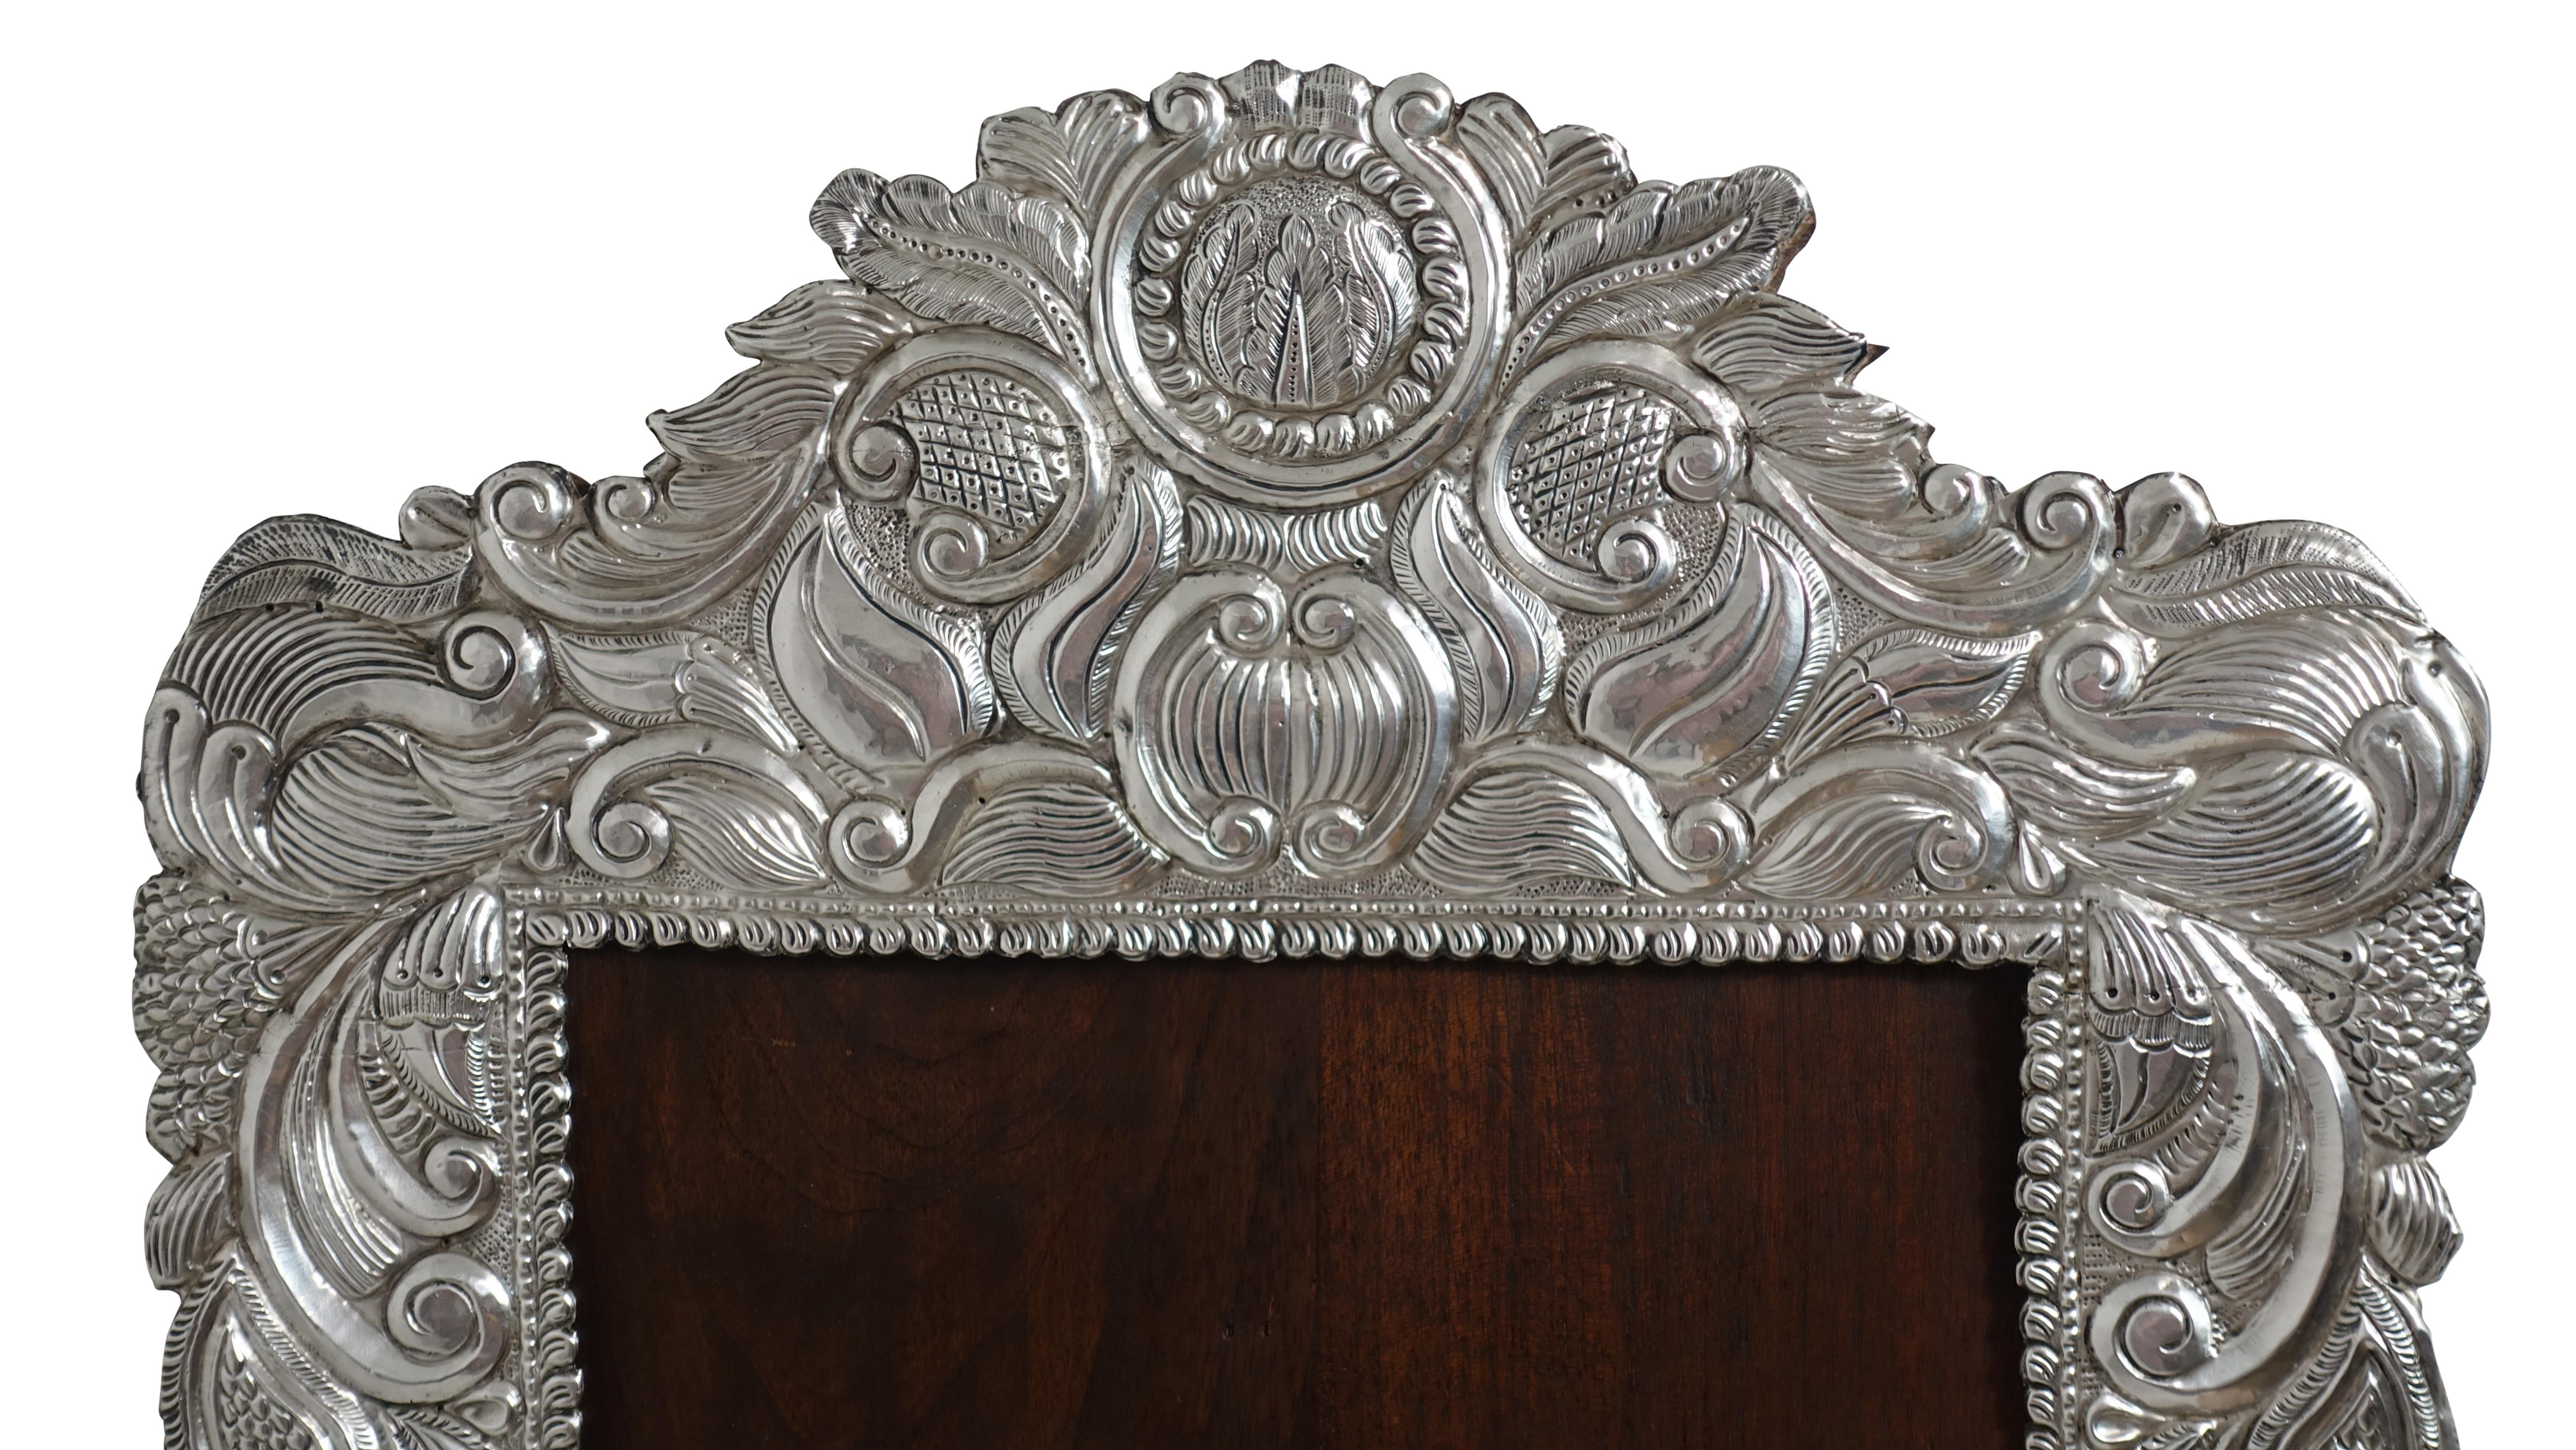 An usually large Spanish Colonial silver frame (possibly originally for a religious saint) with a mahogany back. Having a wonderful mix of European and Colonial design of C-scrolls, sun flowers and leaves. Unmarked but definitely silver. South